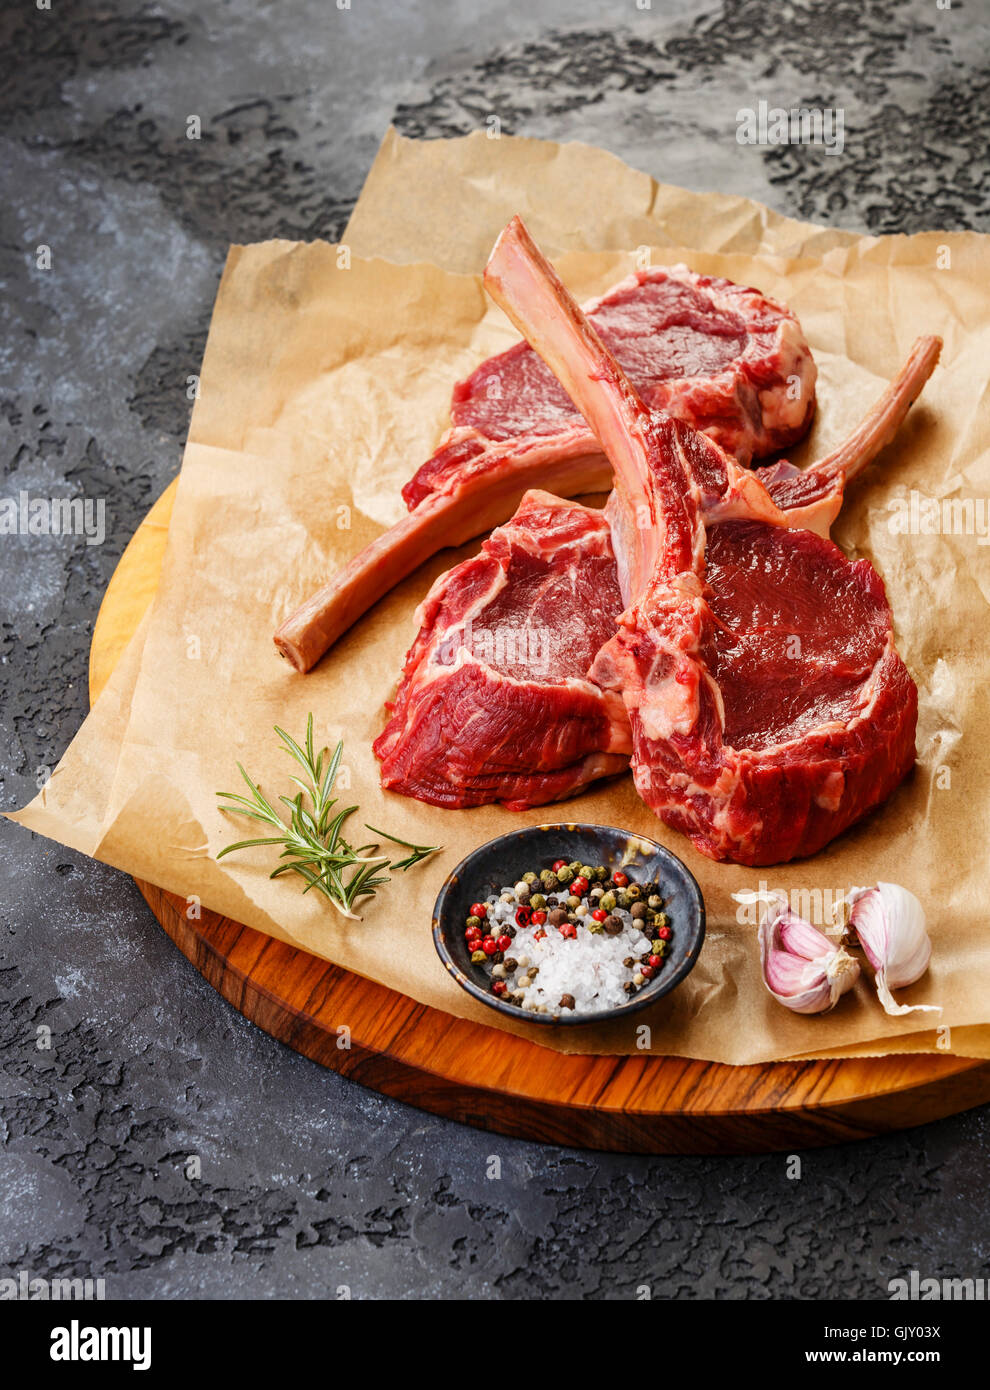 Raw fresh meat Veal ribs Steak on bone and spices on dark background Stock Photo